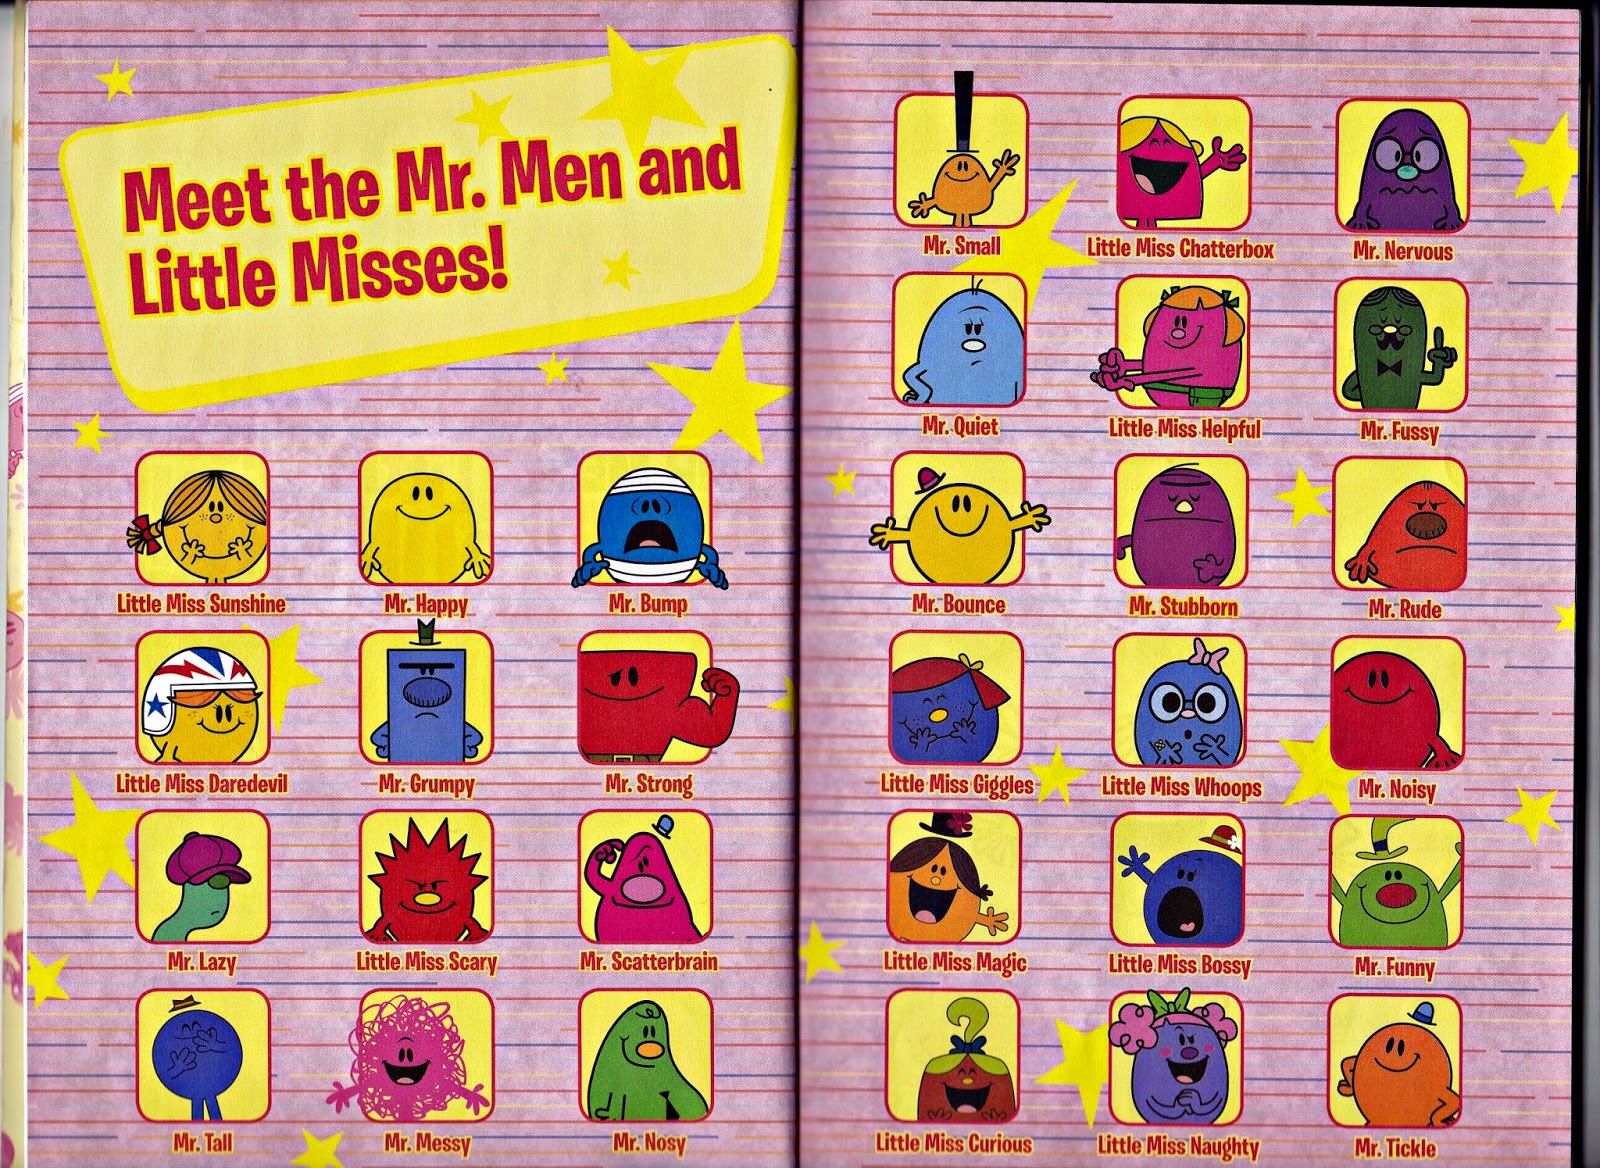 I'm sure a lot of you are familiar with the Mr. Men and Little Miss bo...